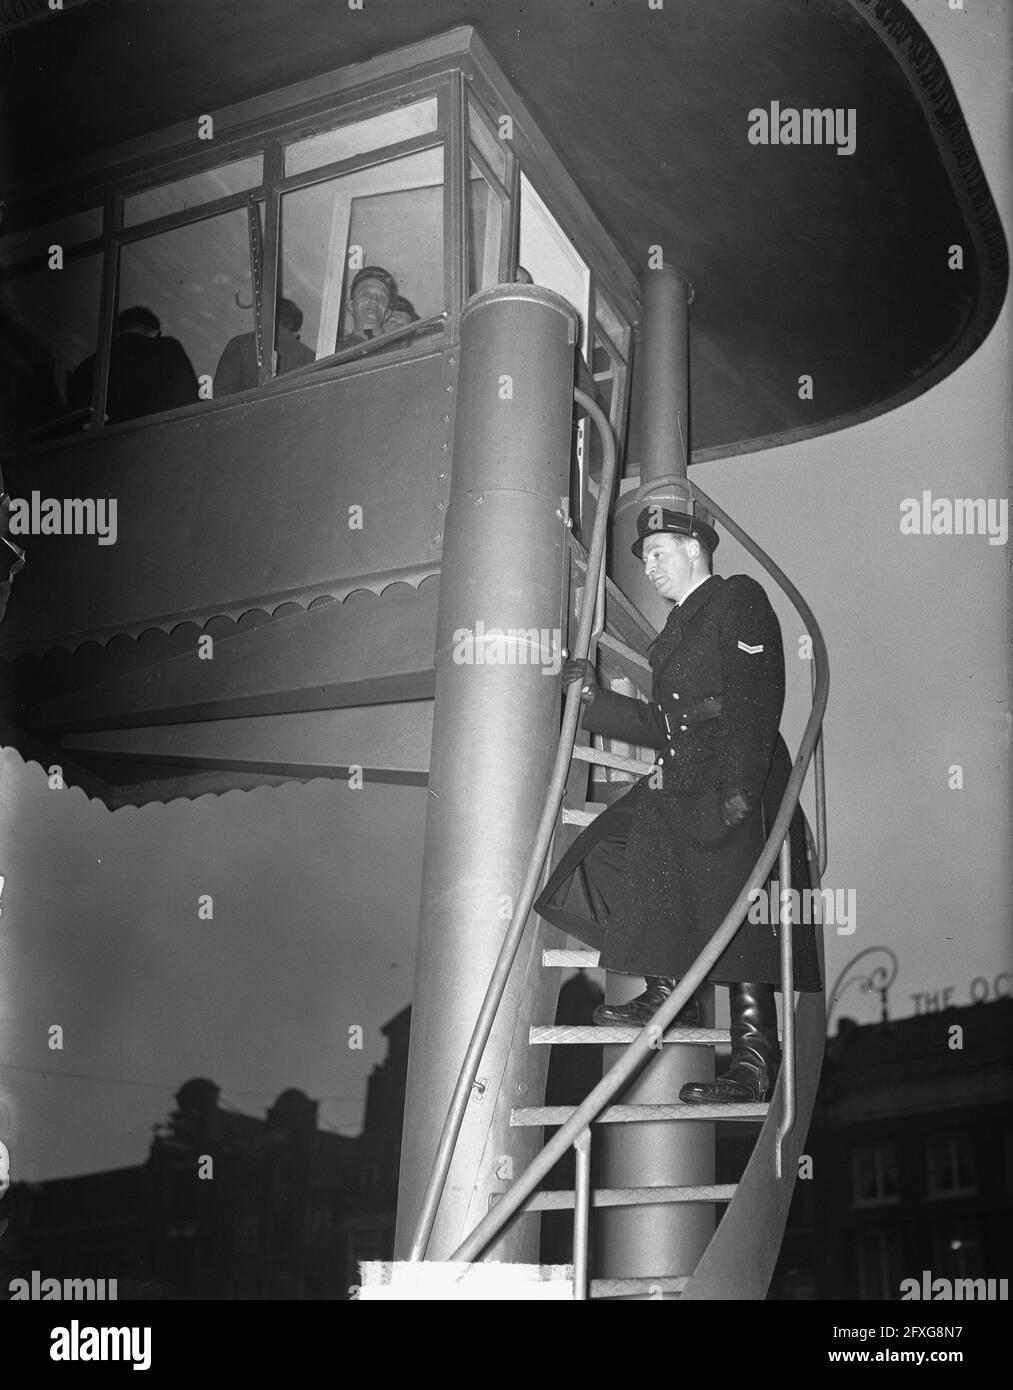 Traffic cop in Dovecote on the Meent, January 3, 1950, Traffic cops, The Netherlands, 20th century press agency photo, news to remember, documentary, historic photography 1945-1990, visual stories, human history of the Twentieth Century, capturing moments in time Stock Photo